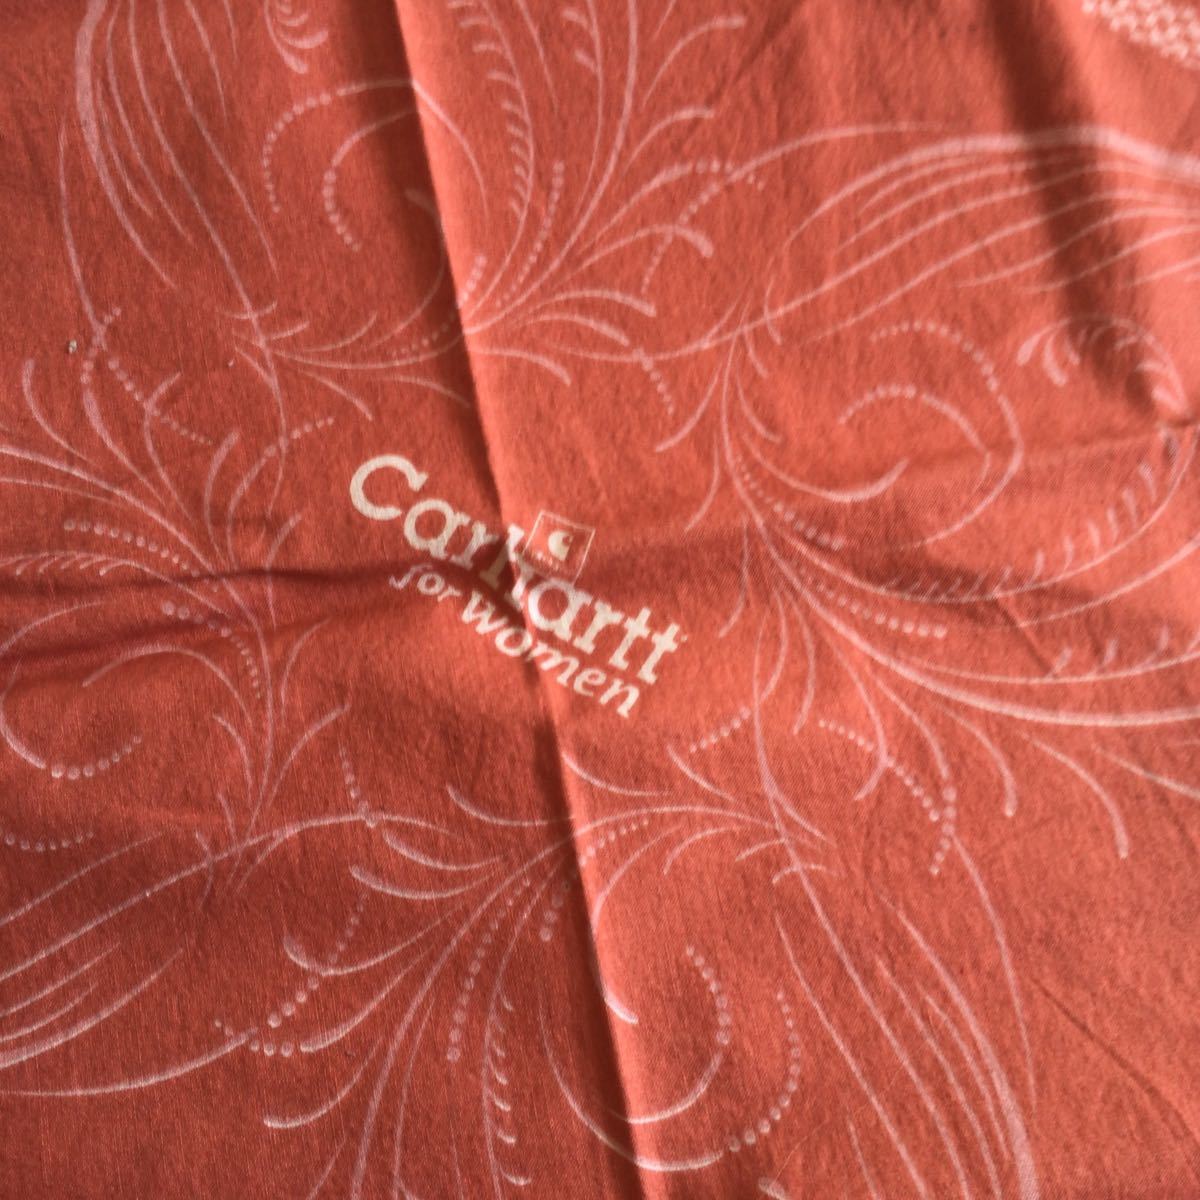 Vintage Carhartt for woman カーハート バンダナ / work 作業 販売促進 グッズ 雑貨 ハンカチ USA _画像3